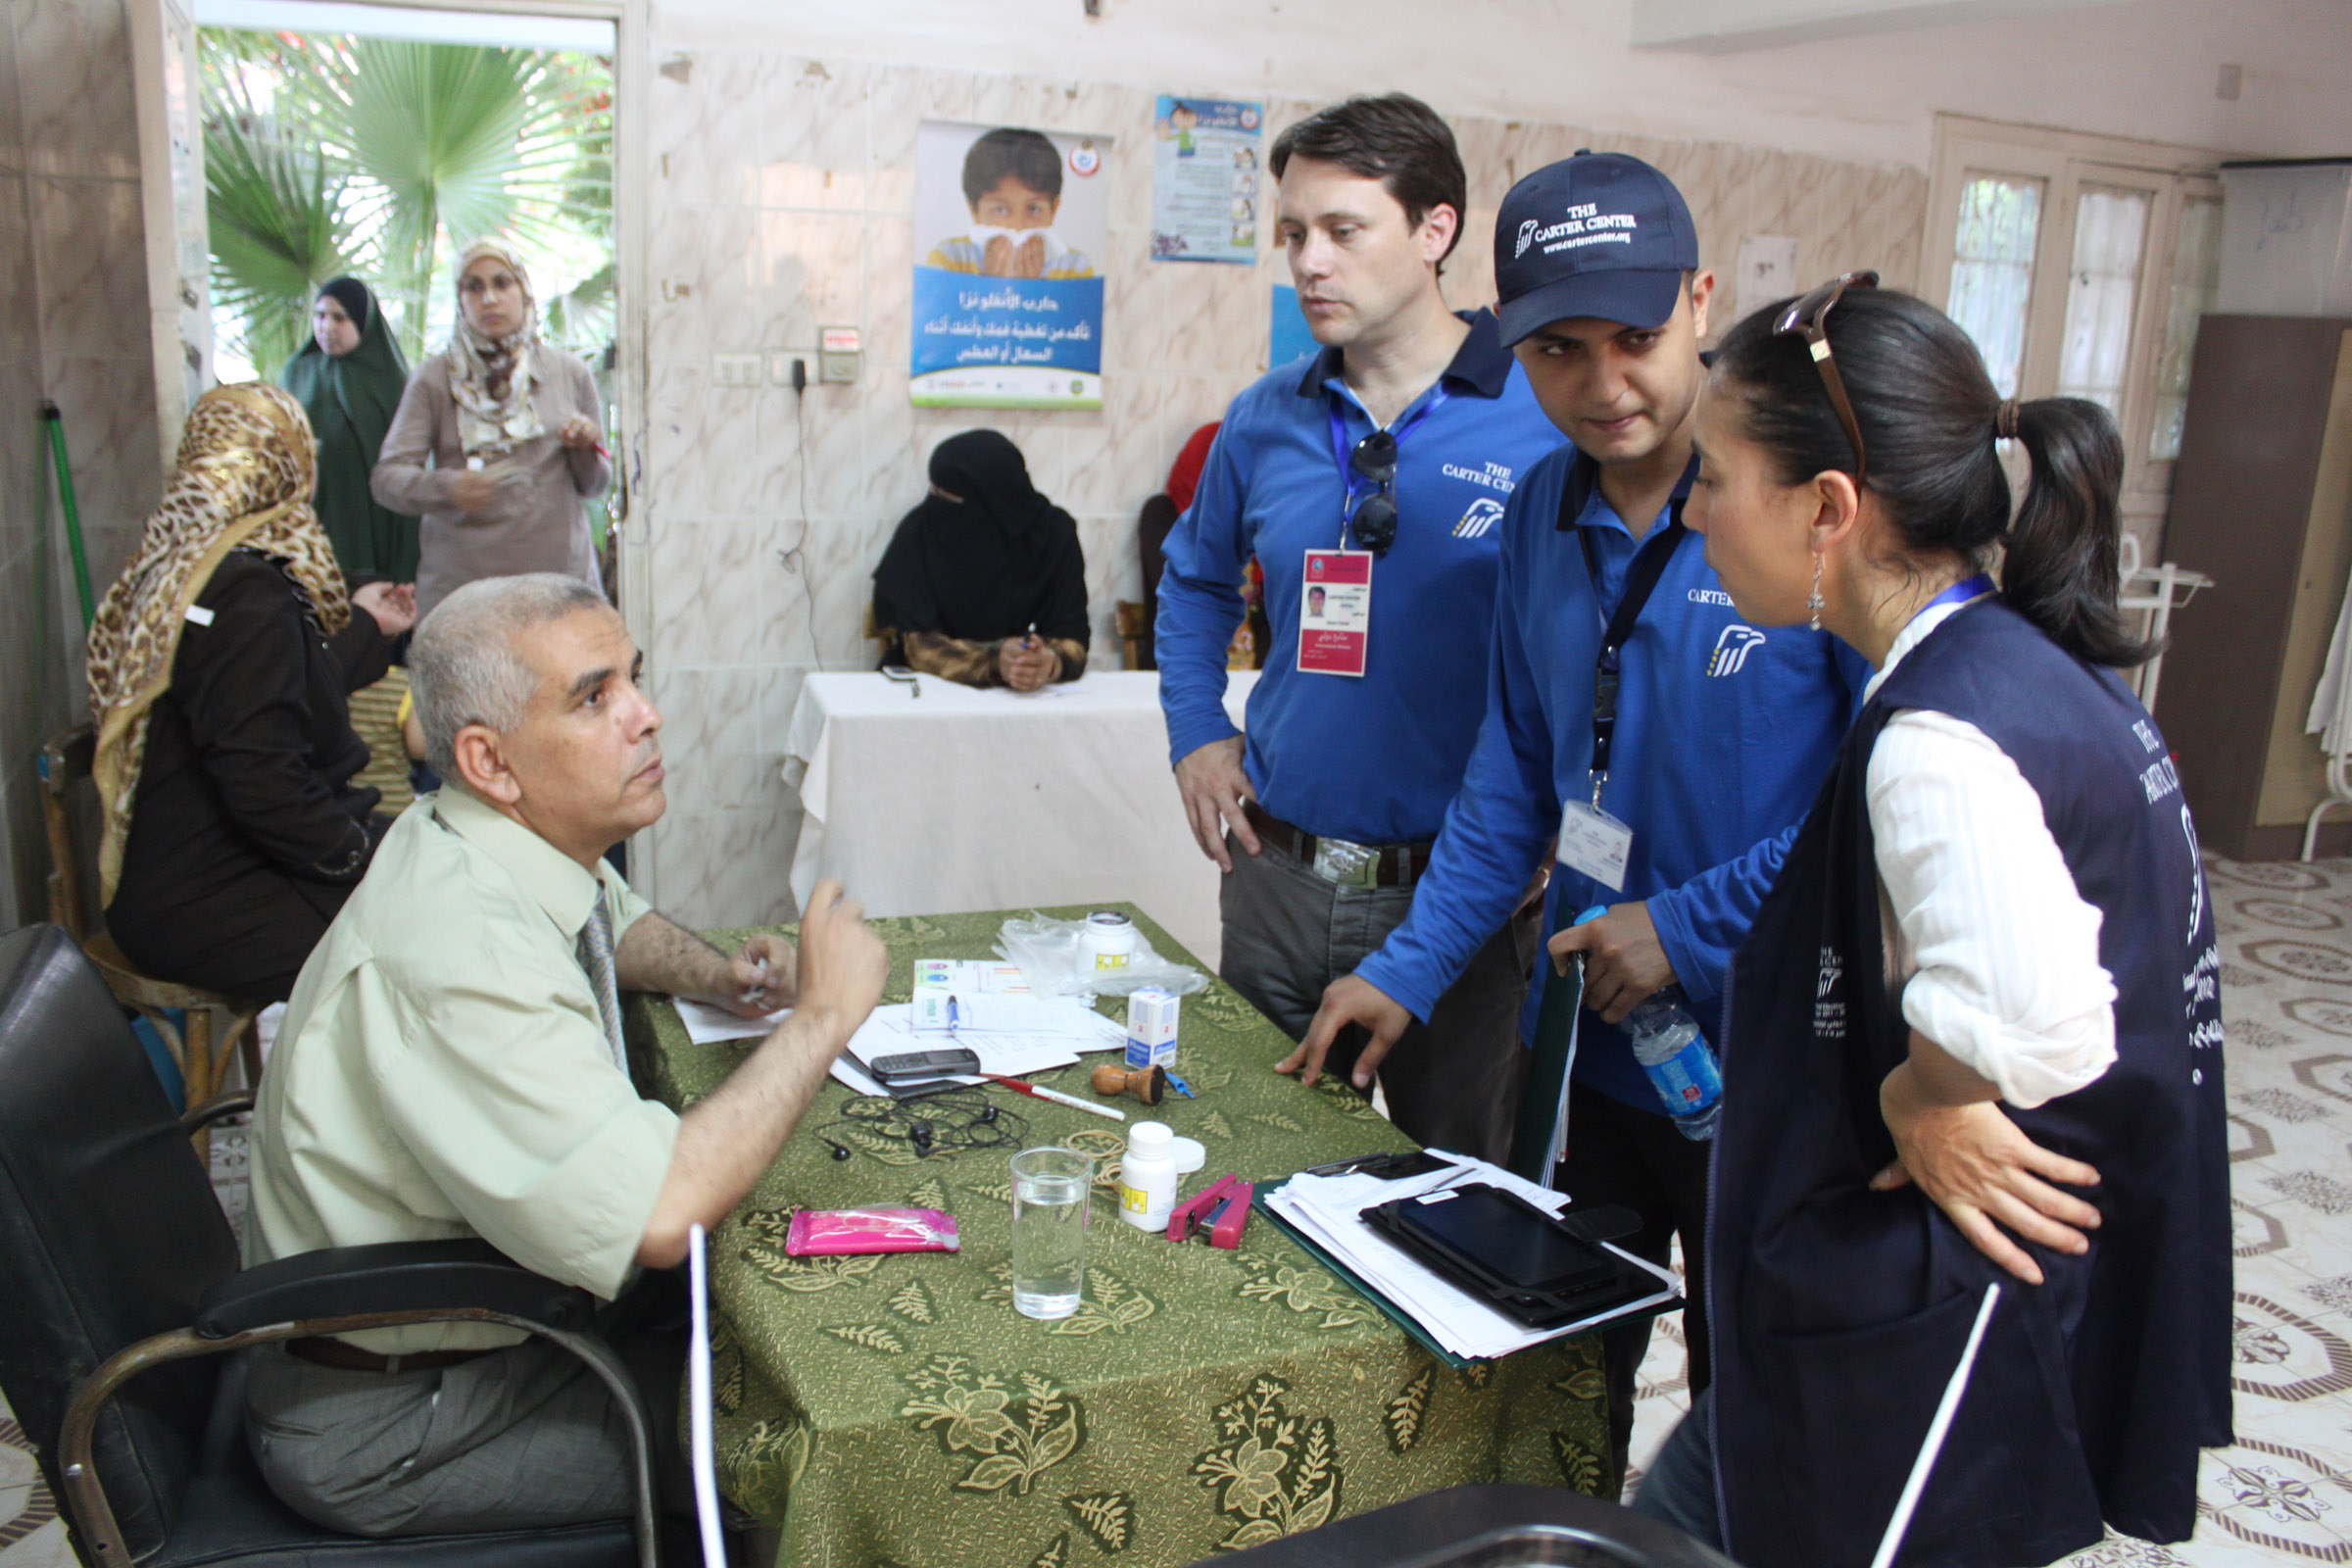 Carter Center Delegation Co-Leader and State Senator Jason Carter, Field Office Director Sanne van den Bergh, and logistics coordinator Sameh Ibrahim meet with a judge overseeing a polling station at Aisha Hasaneen Primary School in Fayoum. 